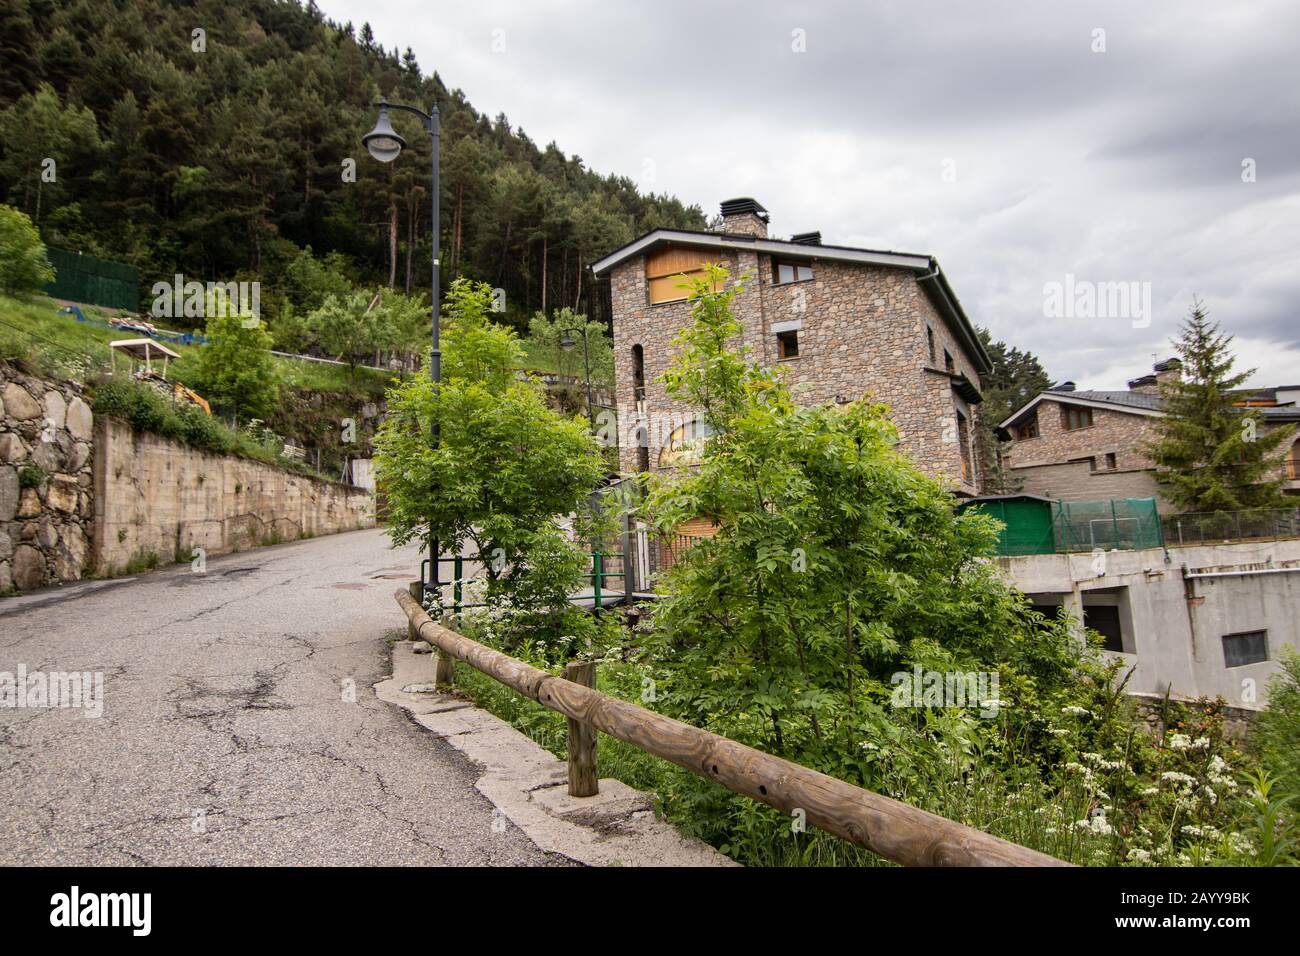 Encamp - a small village in Pyrenees, in Andorra. Encamp has been considered an important summer and winter sports center for Andorra tourism. Near pl Stock Photo